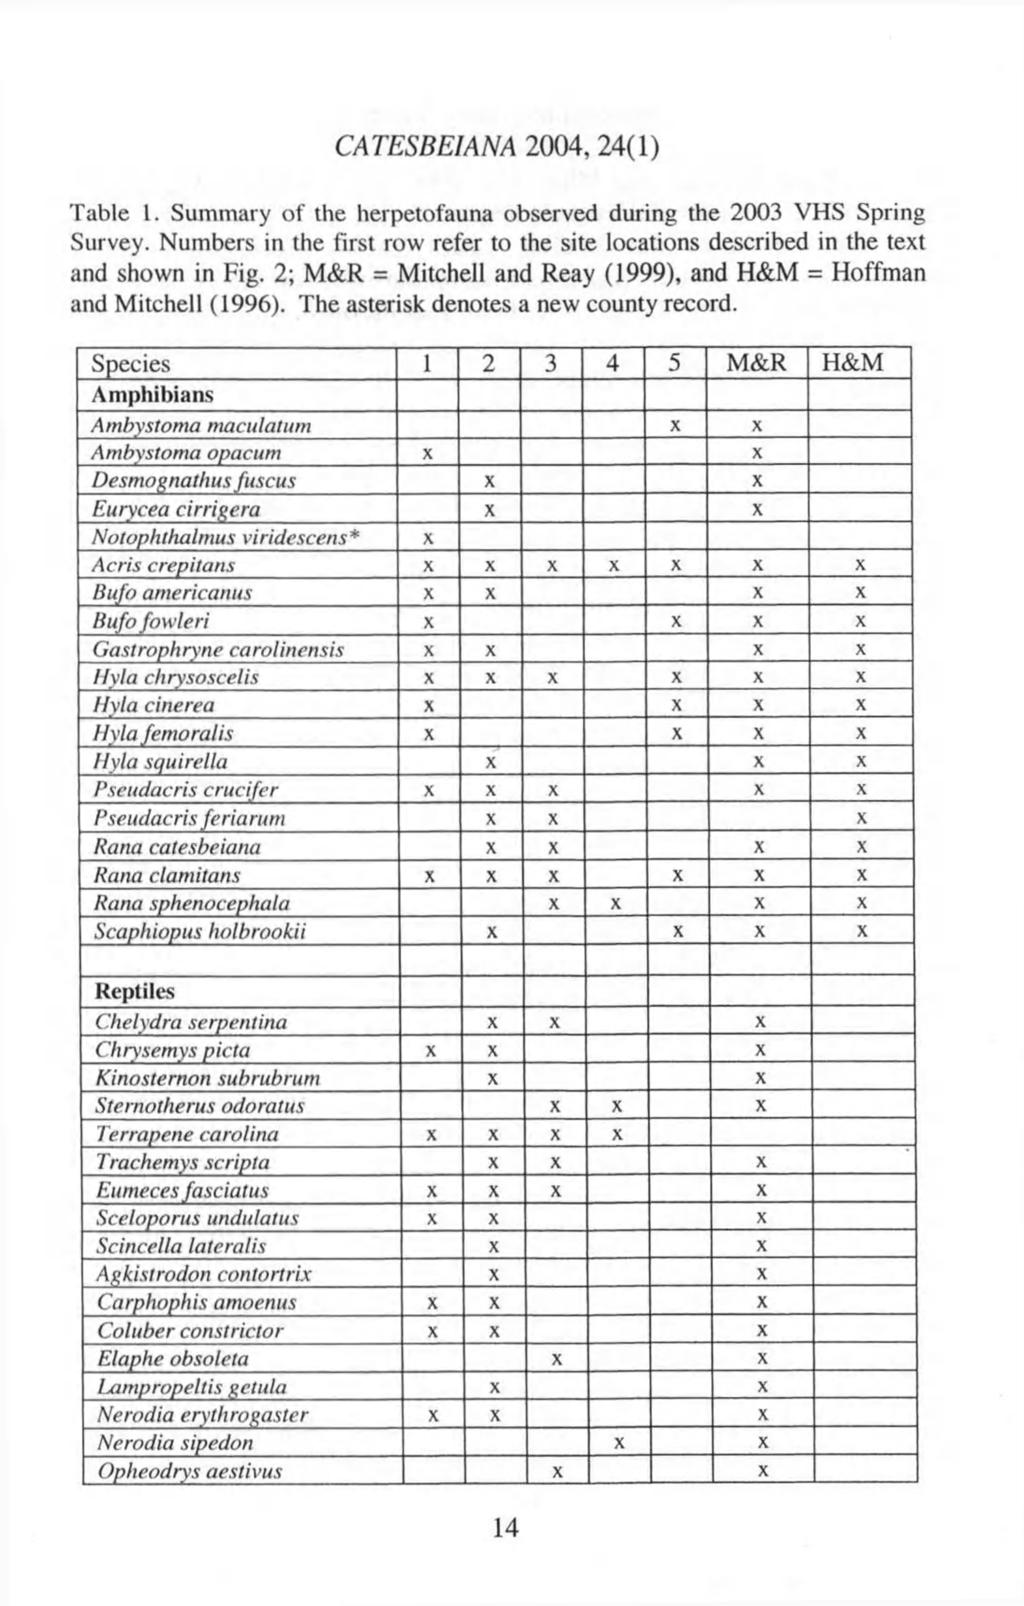 CATESBElANA 2004, 24(1) Table 1. Summary of the herpetofauna observed during the 2003 VHS Spring Survey. Numbers in the first row refer to the site locations described in the text and shown in Fig.